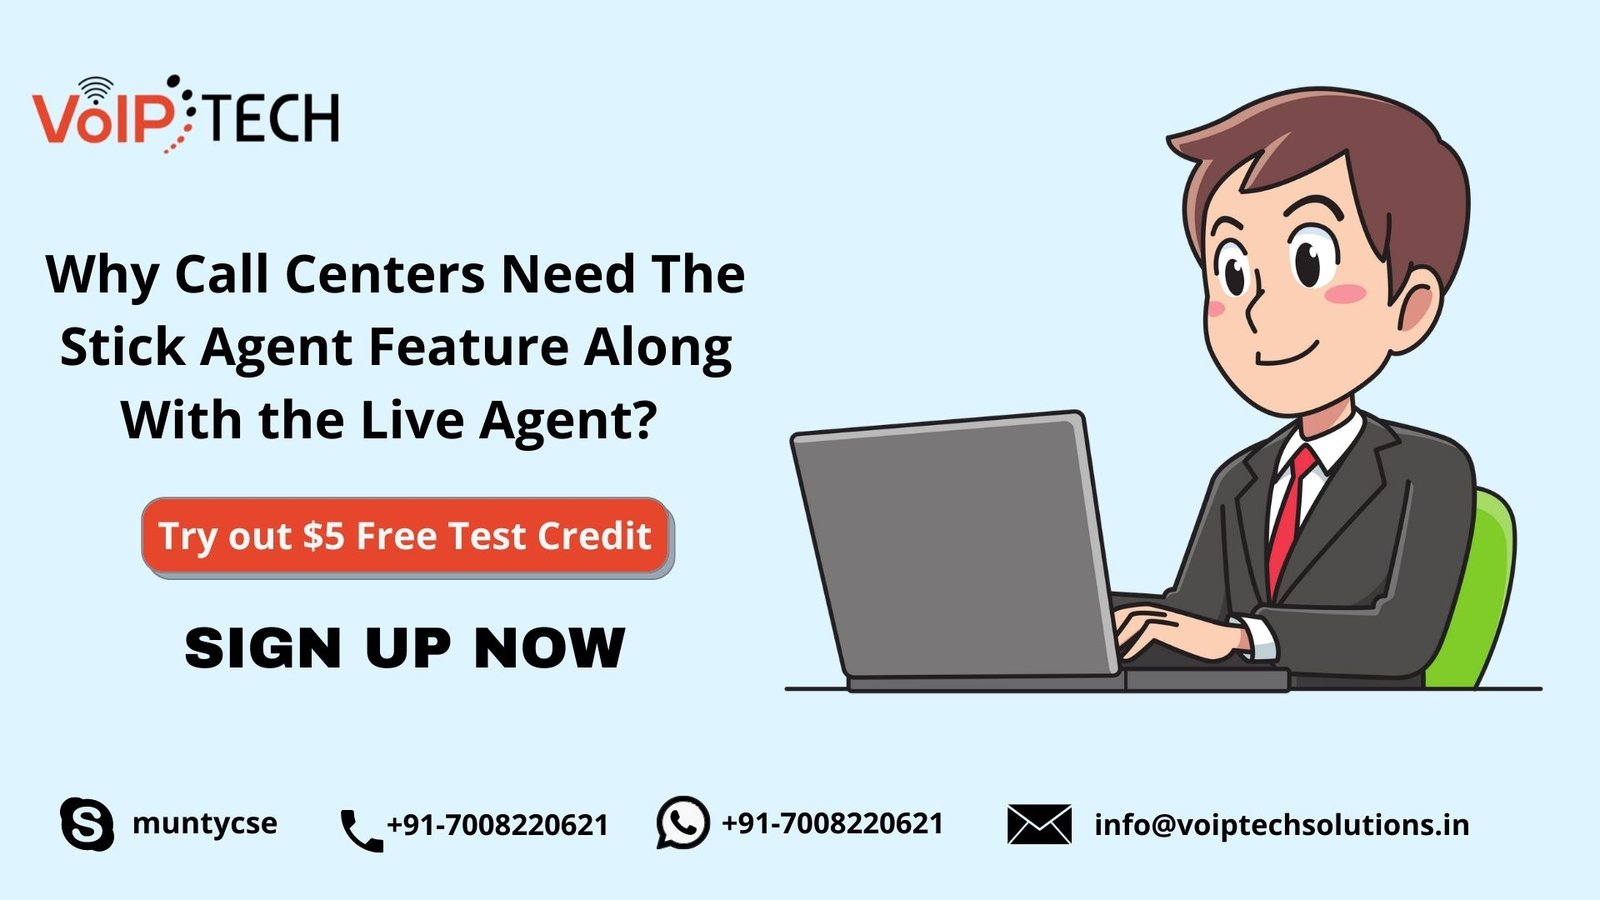 Sticky Agent, Why Call Centers Need The Stick Agent Feature Along With the Live Agent? , VoIP tech solutions, vici dialer, virtual number, Voip Providers, voip services in india, best sip provider, business voip providers, VoIP Phone Numbers, voip minutes provider, top voip providers, voip minutes, International VoIP Provider